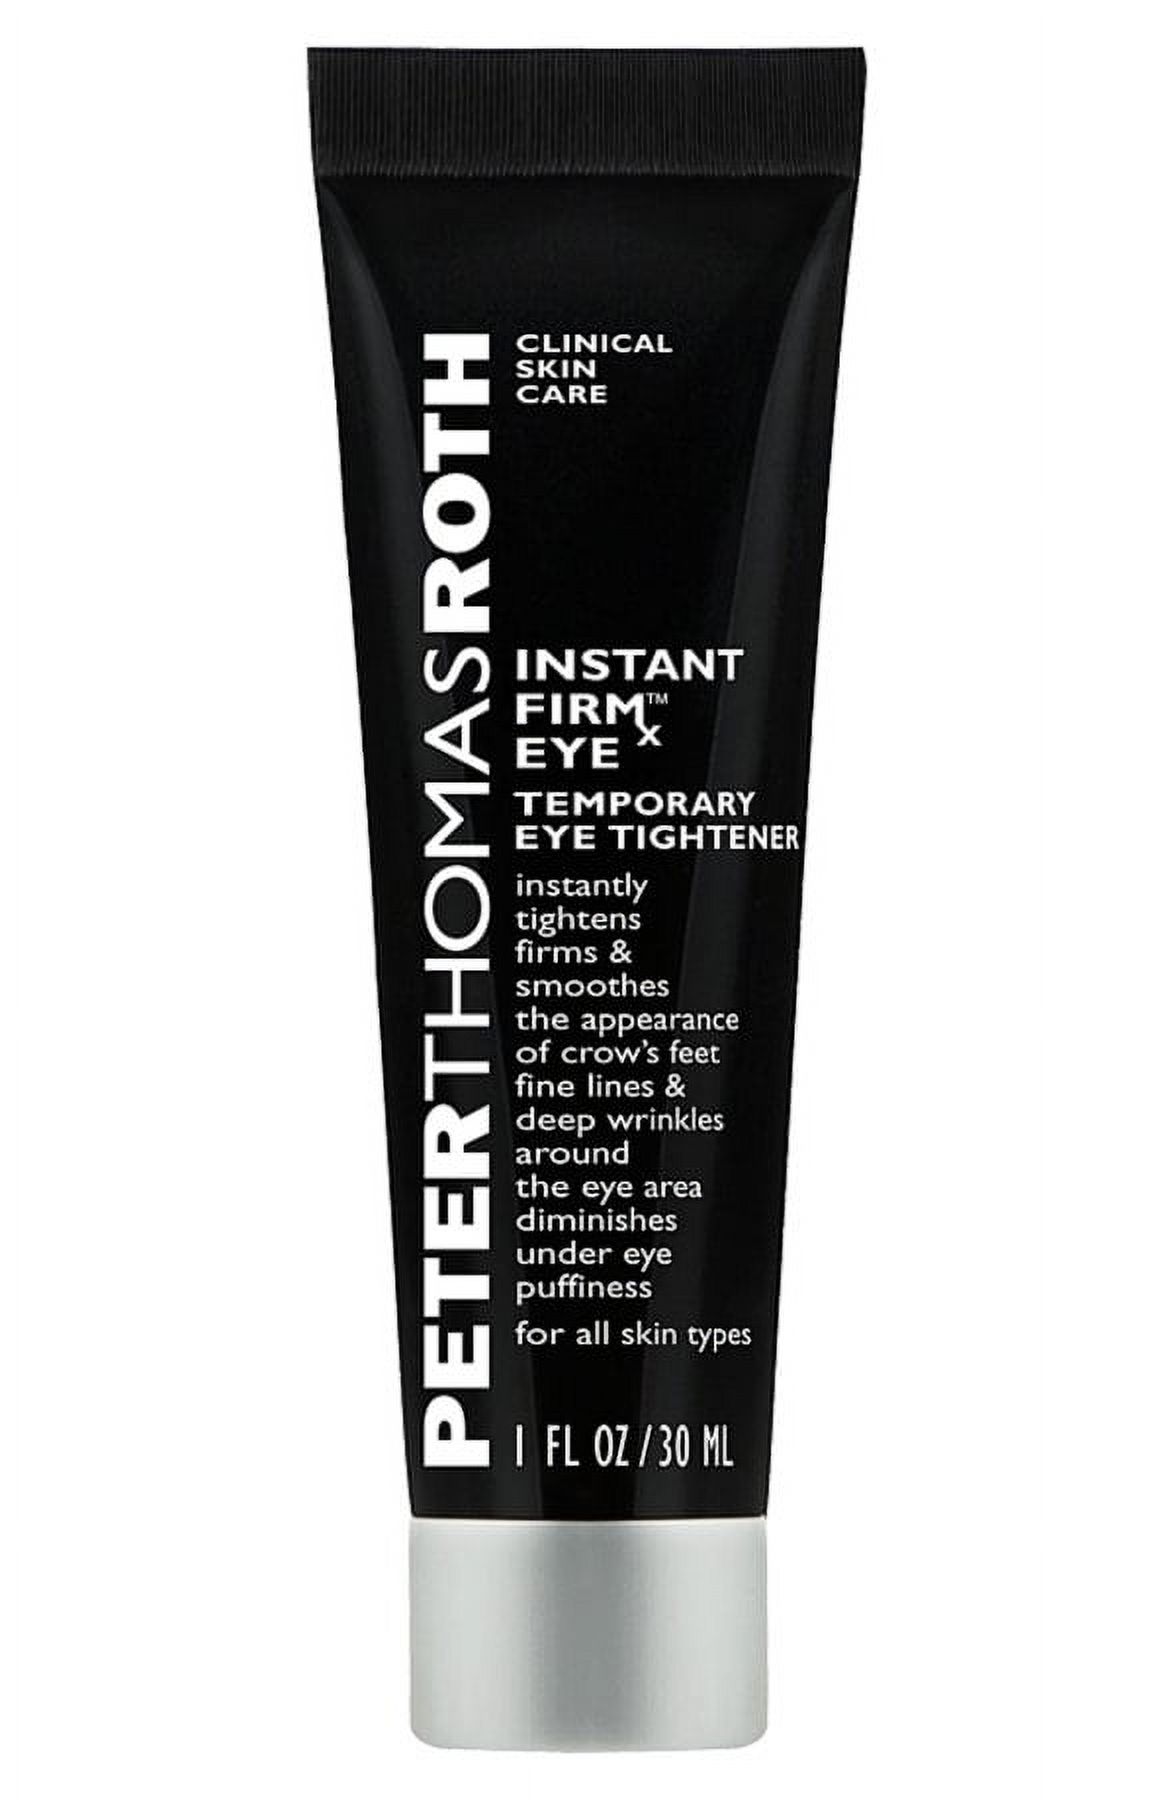 Peter Thomas Roth Instant FIRMx Eye 1 oz - image 1 of 6